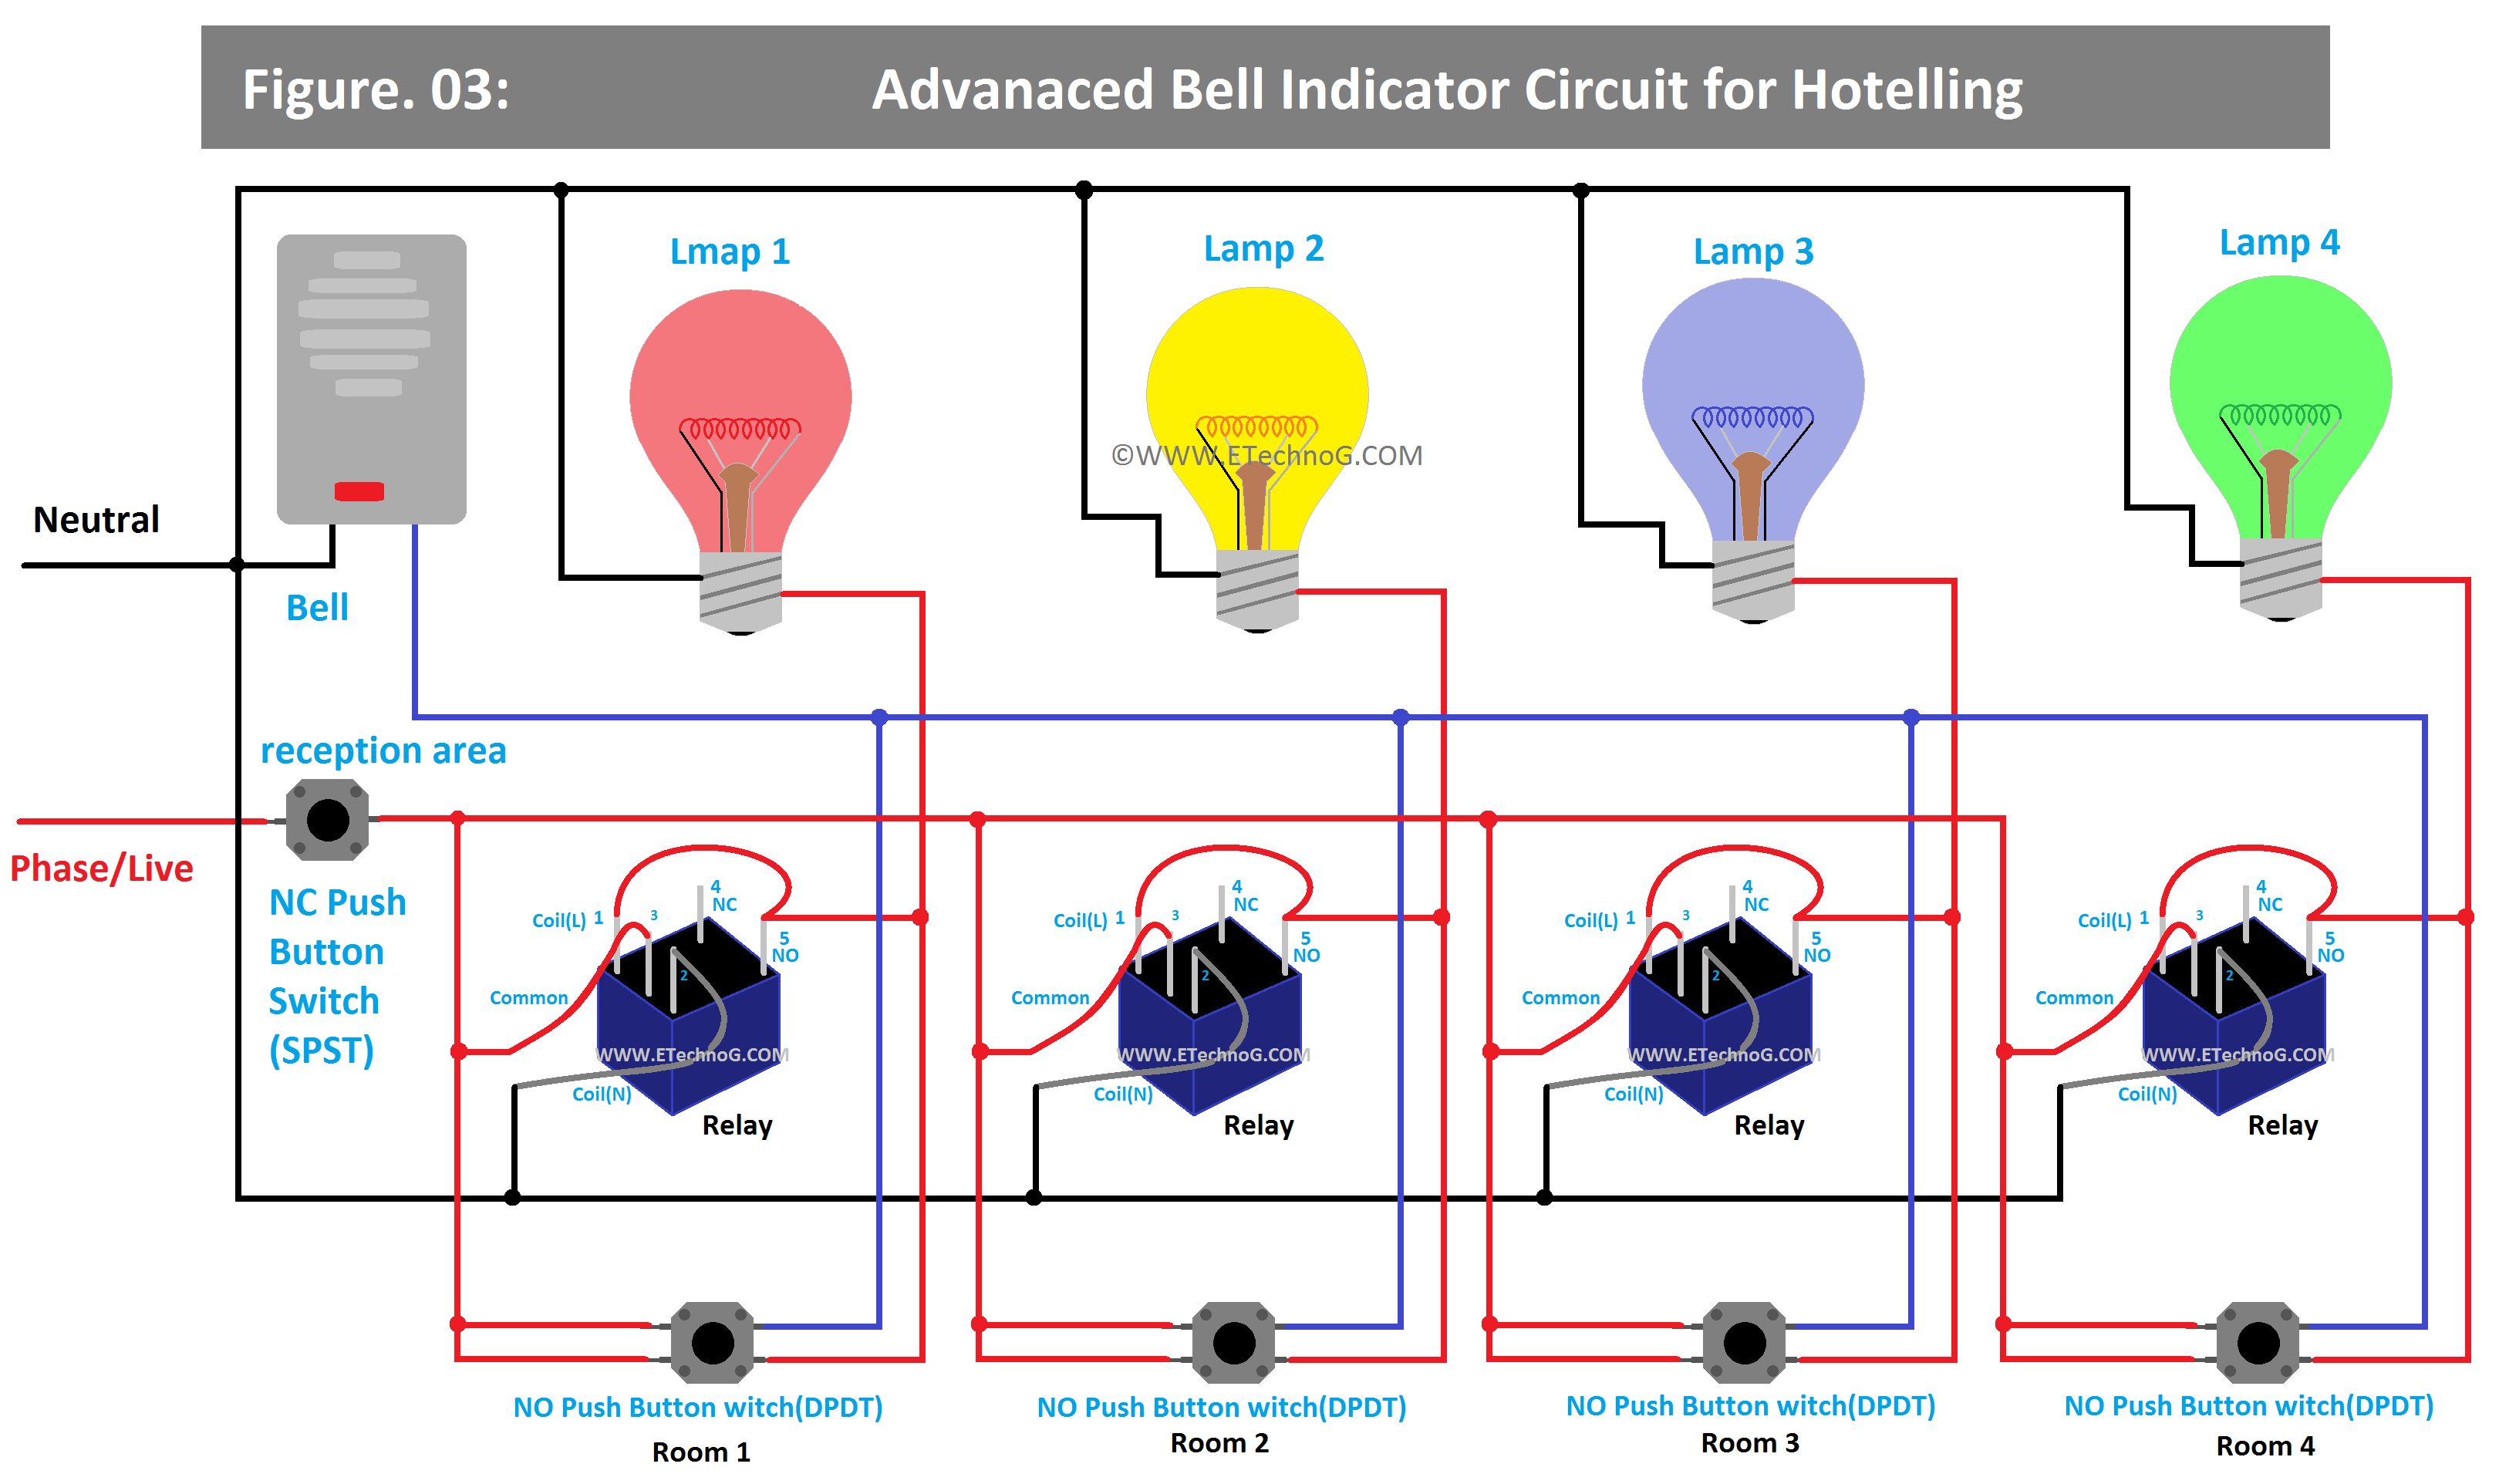 Advanaced Bell Indicator Circuit for Hotelling